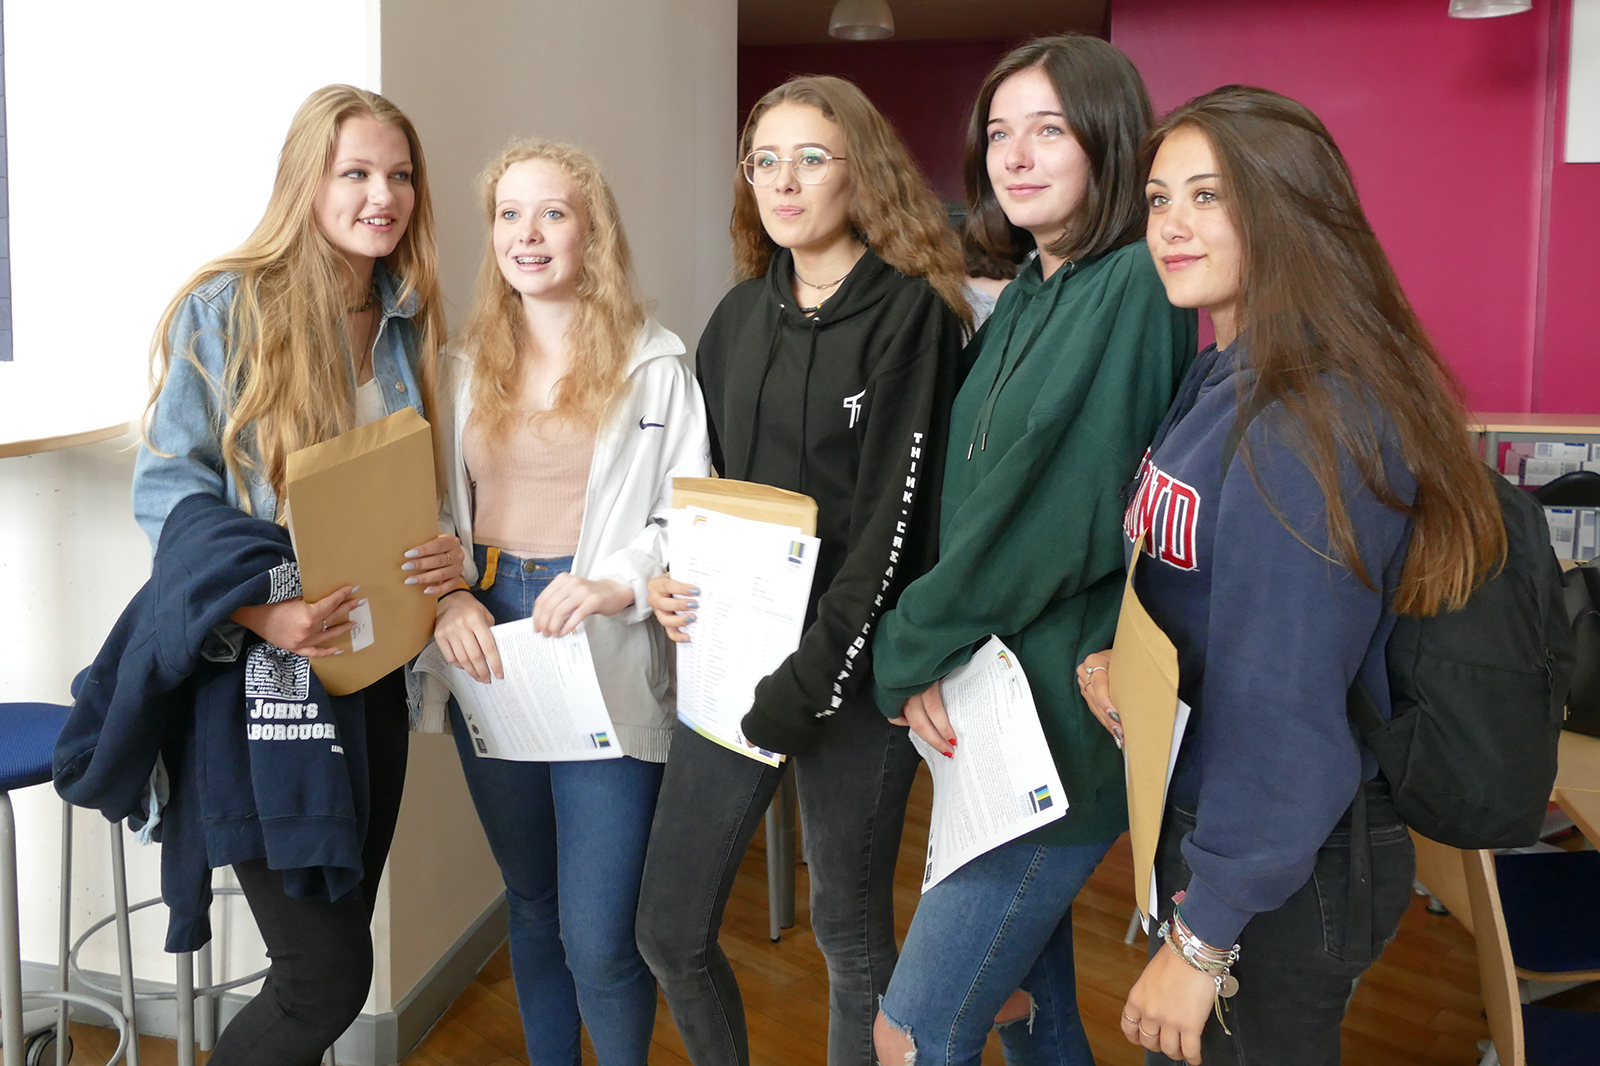 St John's Students Sophie Hole, Sophie Little, Lucy Montefiore, Mae Hands, Tilly Lewis-Lawson